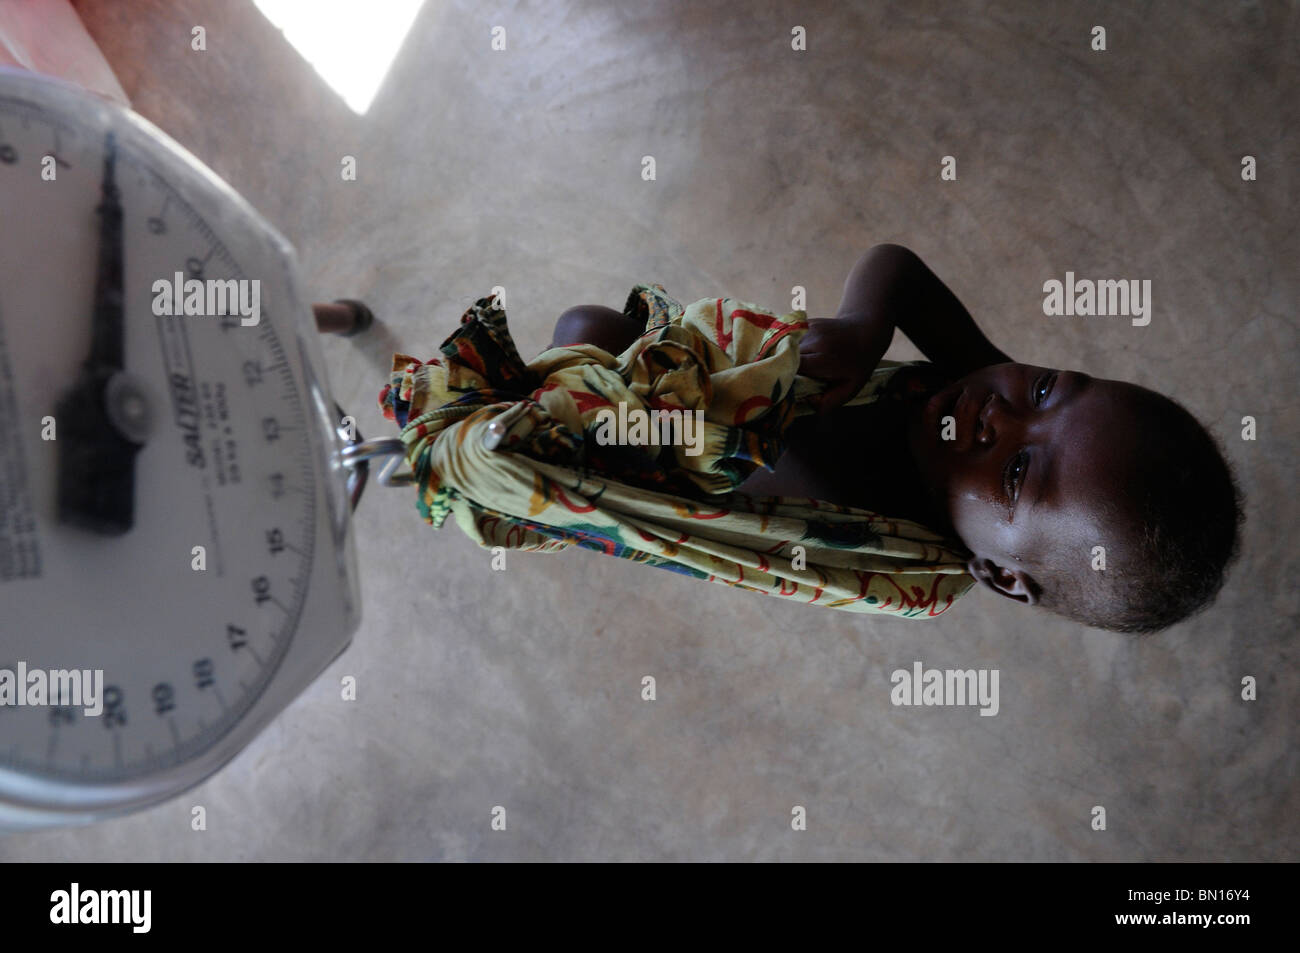 A malnourished child is weighed at an ambulatory medical center in Malawi Africa Stock Photo